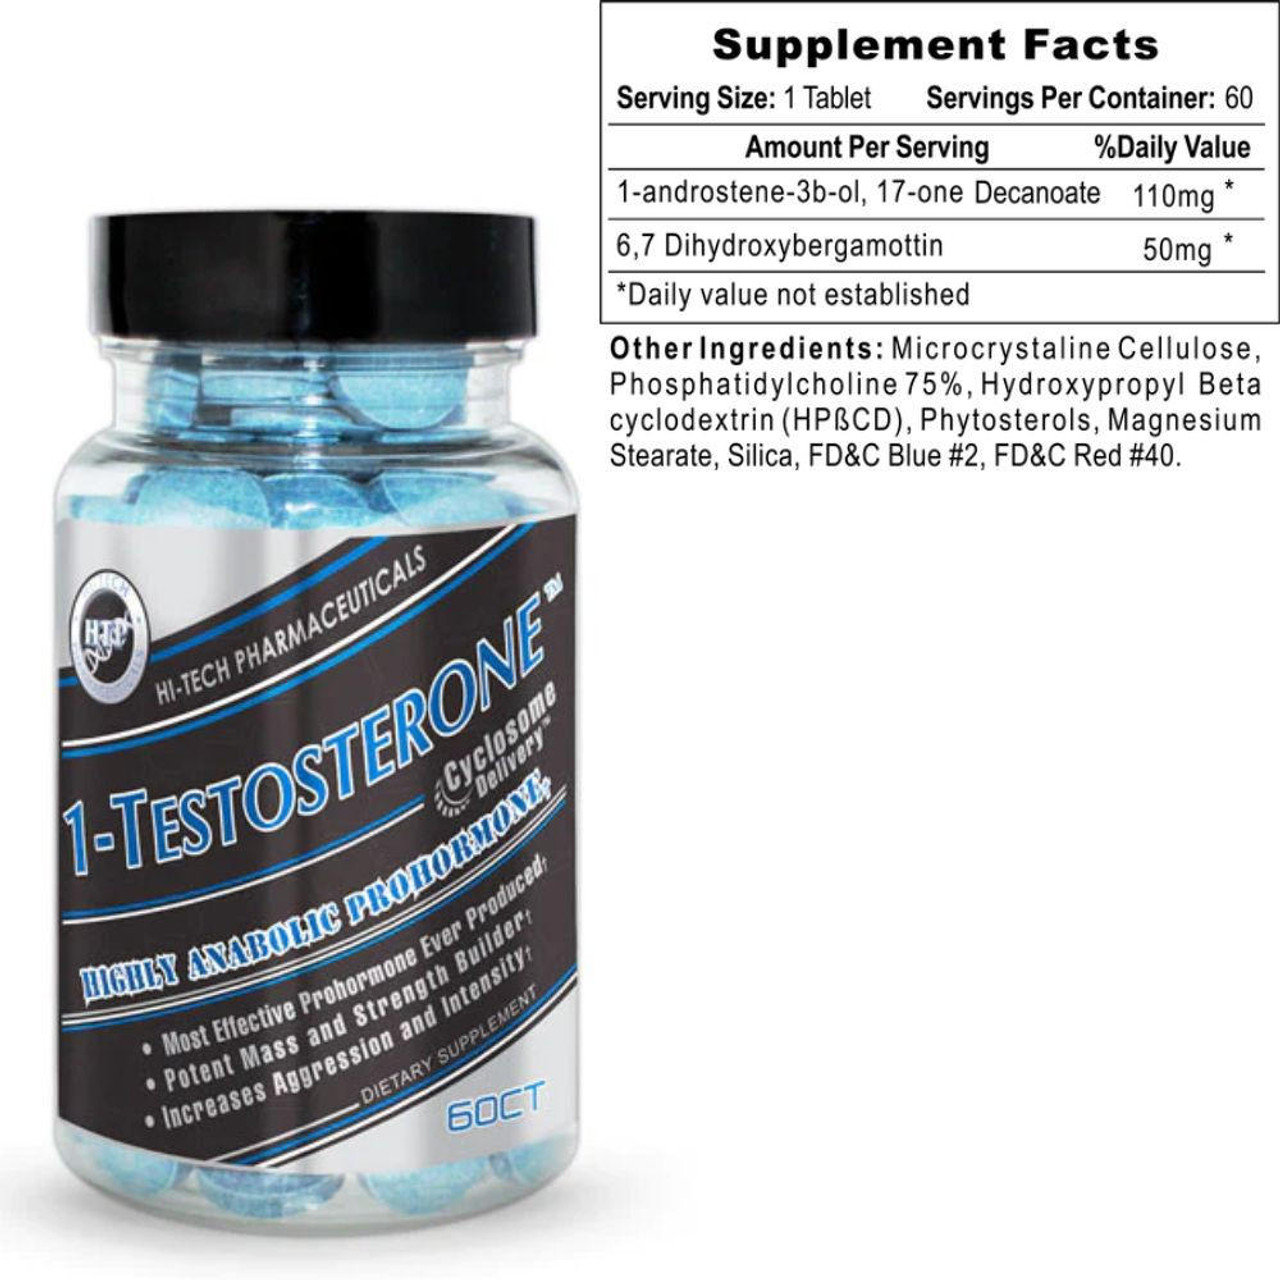 Hey guys, just bought this testosterone test kit and need some quick  answers. I jacked it